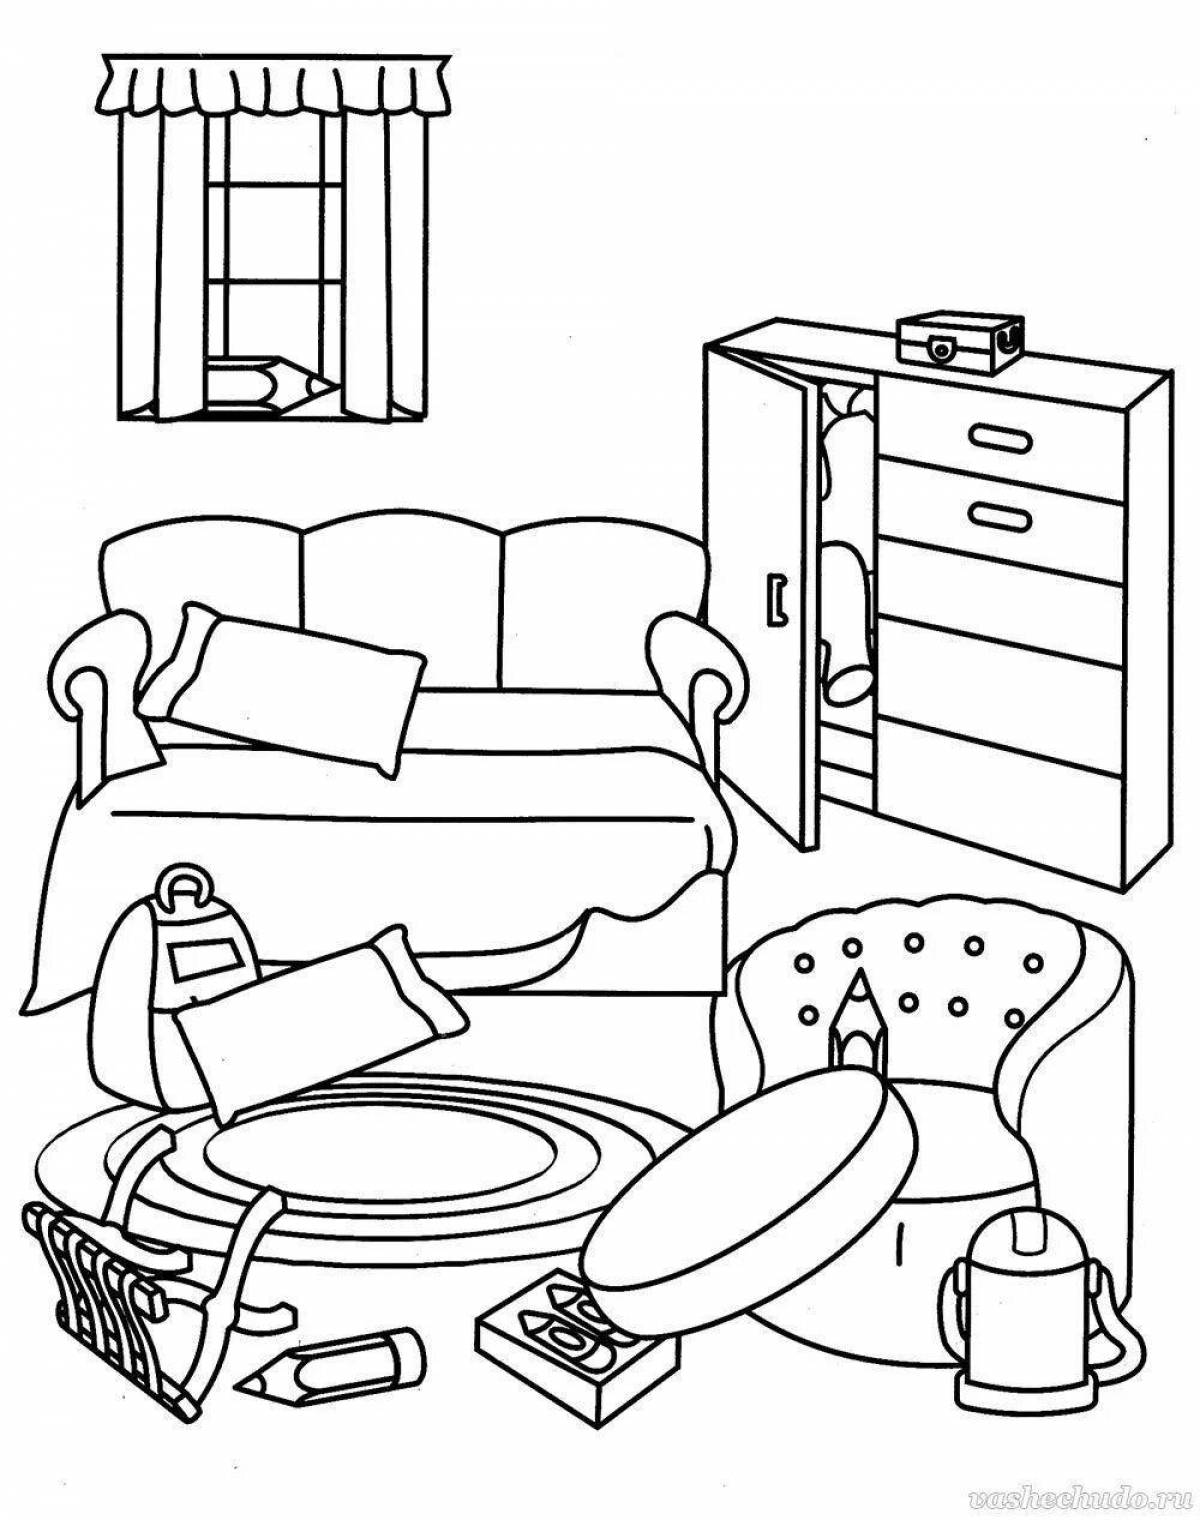 Adorable furniture coloring by number